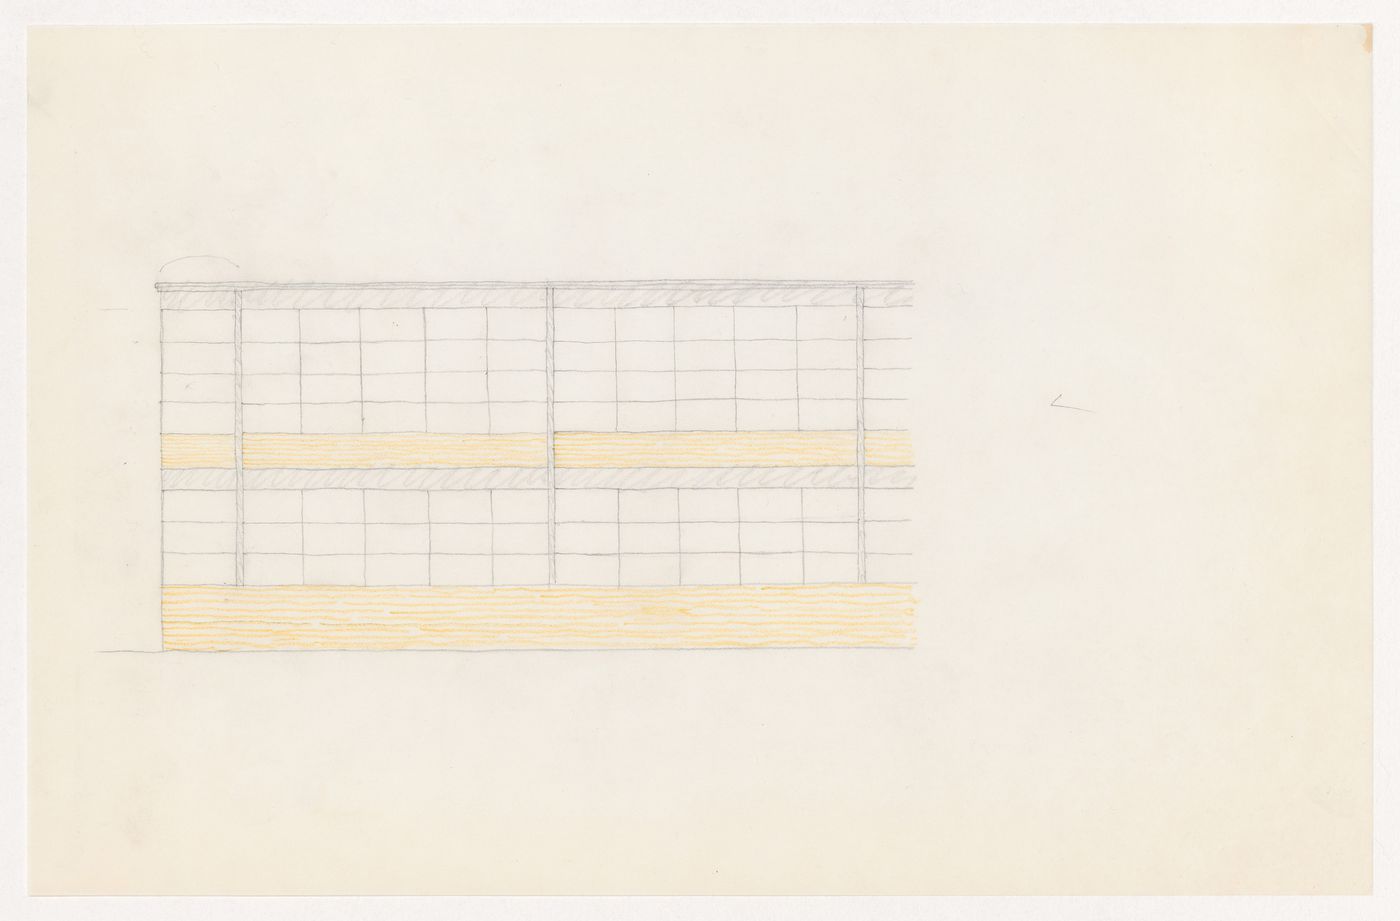 Partial sketch elevation for the Metallurgy Building, Illinois Institute of Technology, Chicago